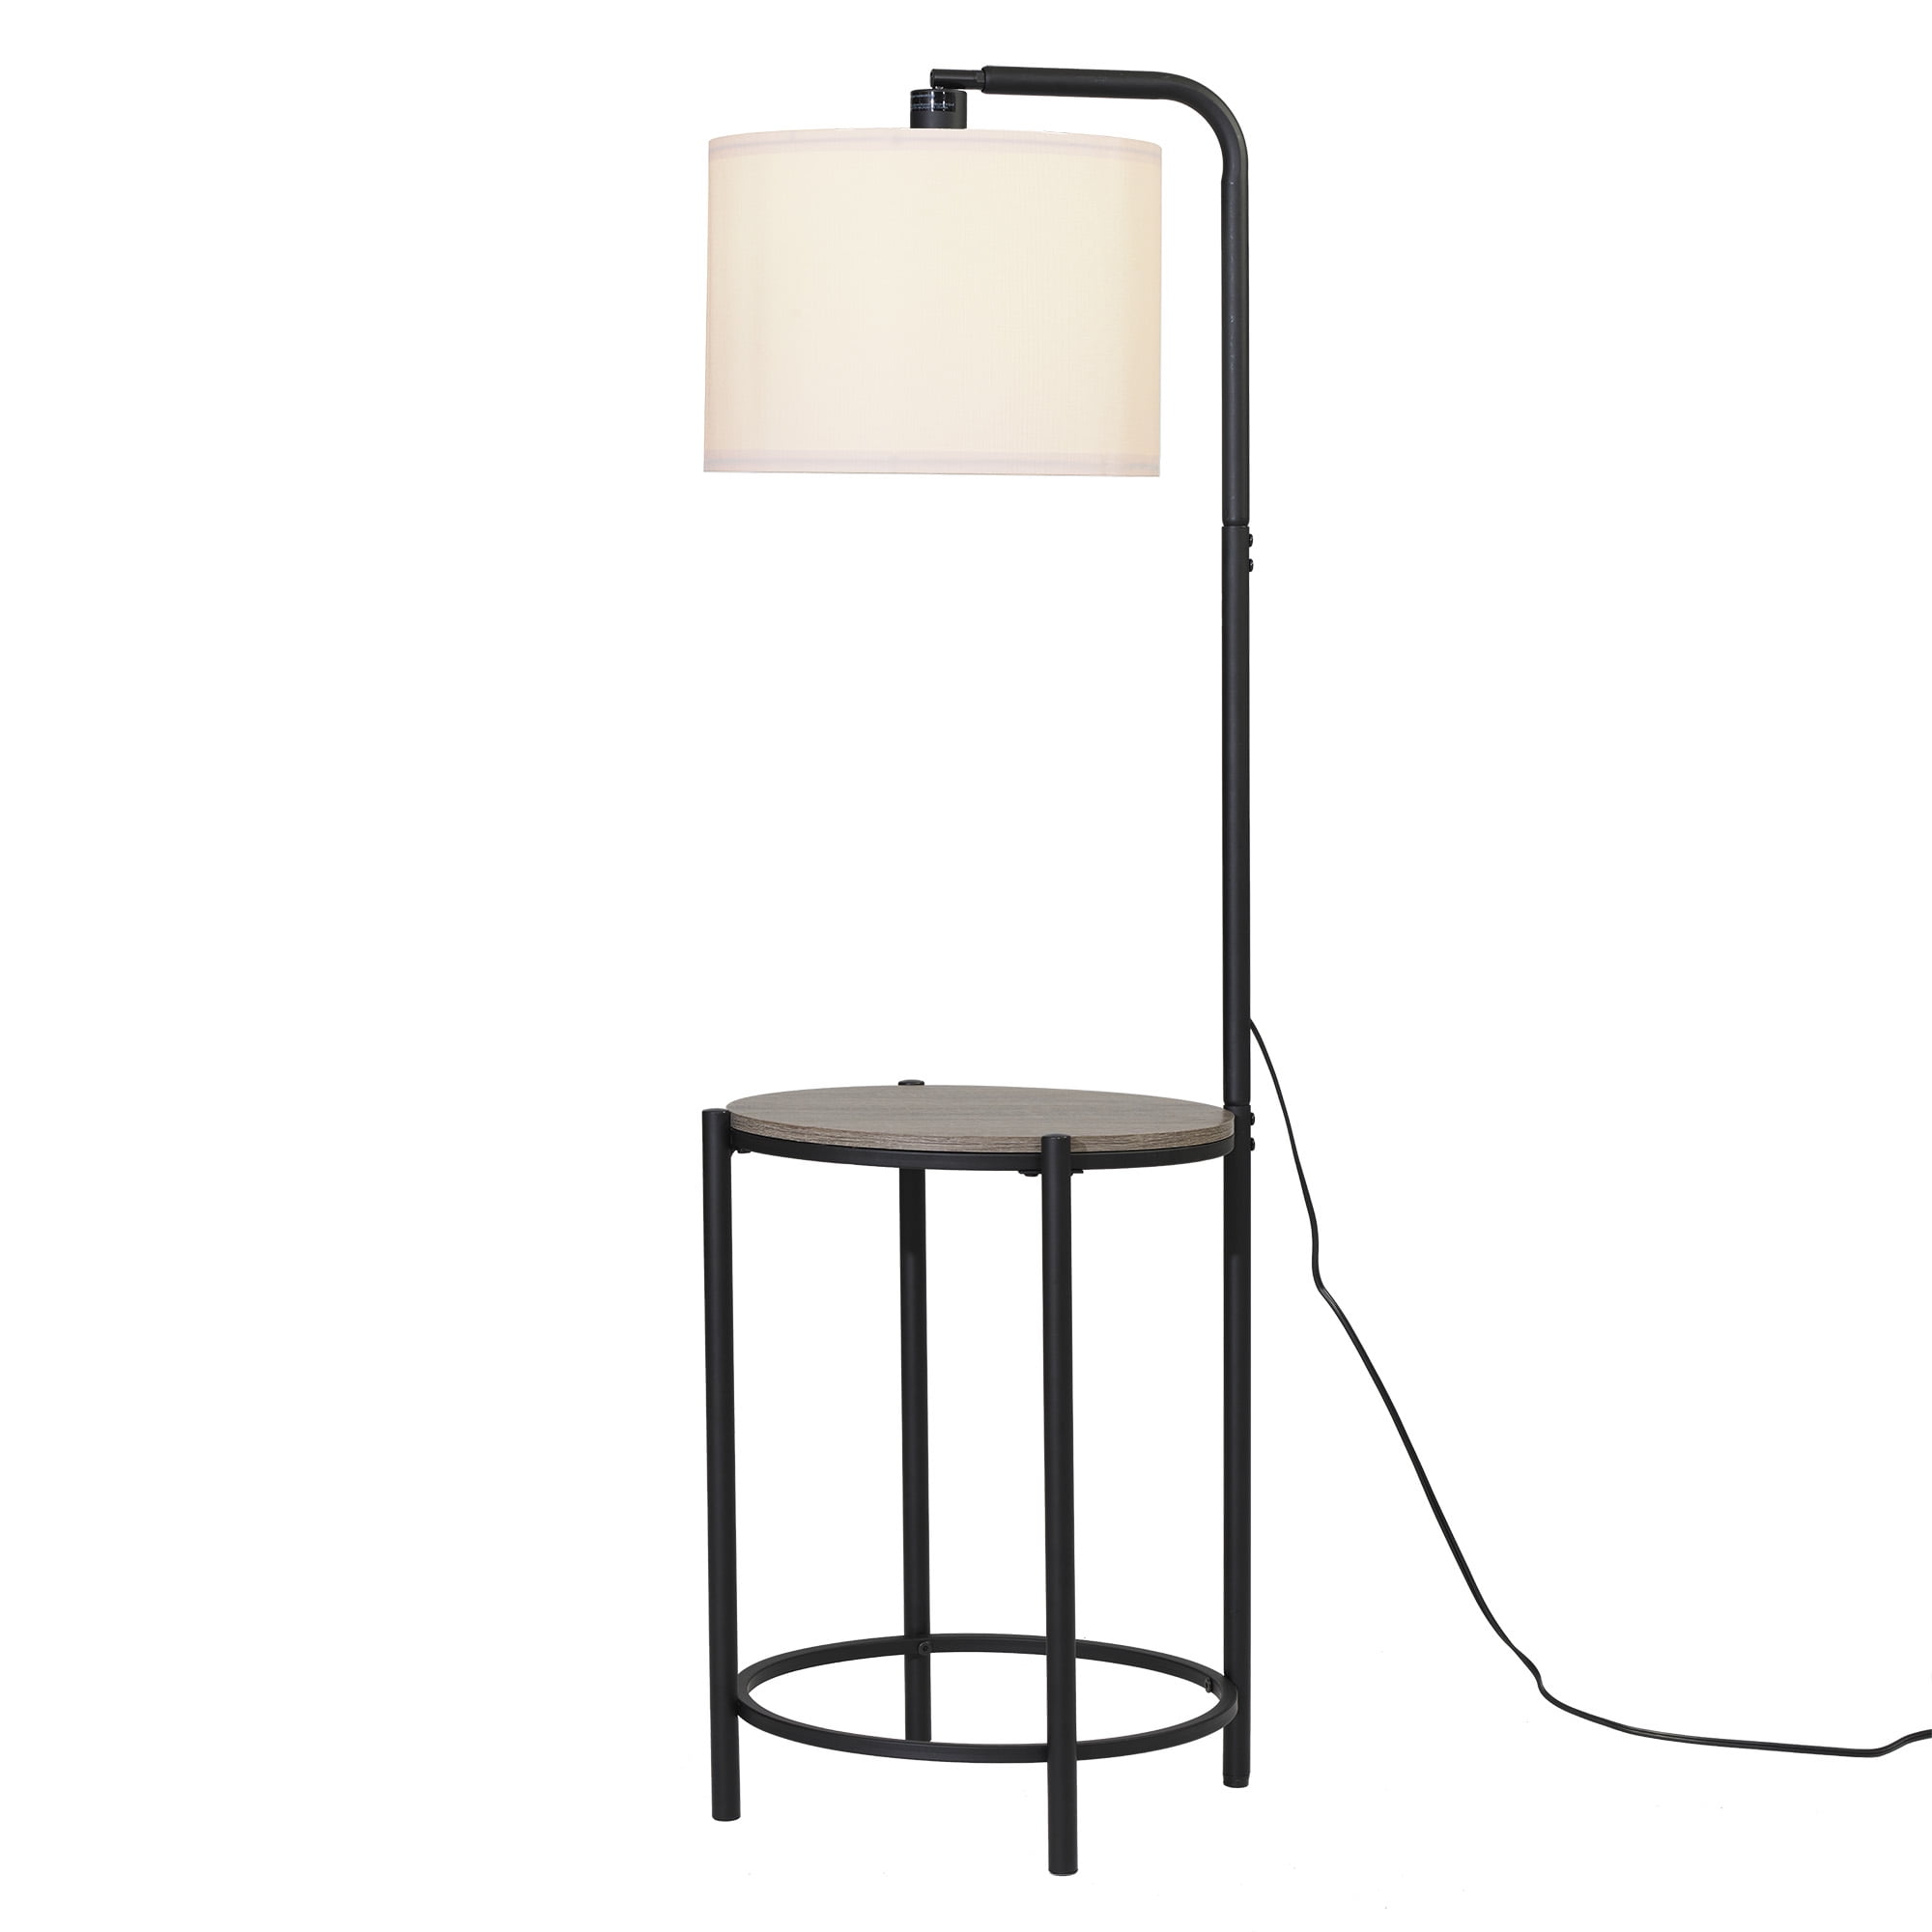 Mainstays 54-inch Floor Lamp with Faux Wood Finished Table